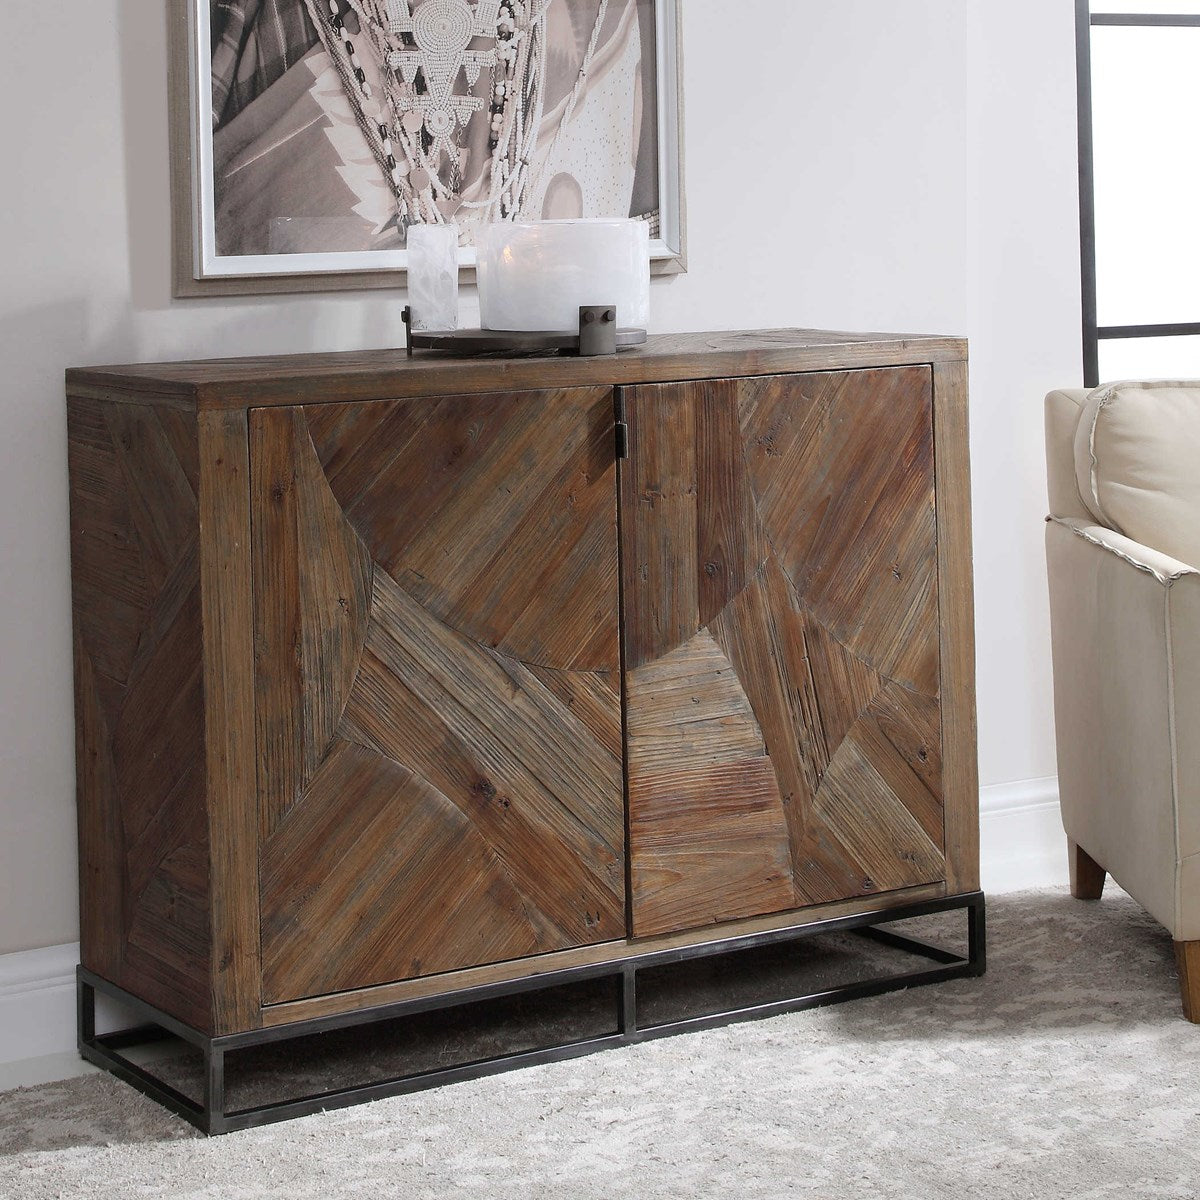 Angle View. Featuring Abstract Geometric Marquetry Doors In Reclaimed Fir Wood, Sun Faded And Washed